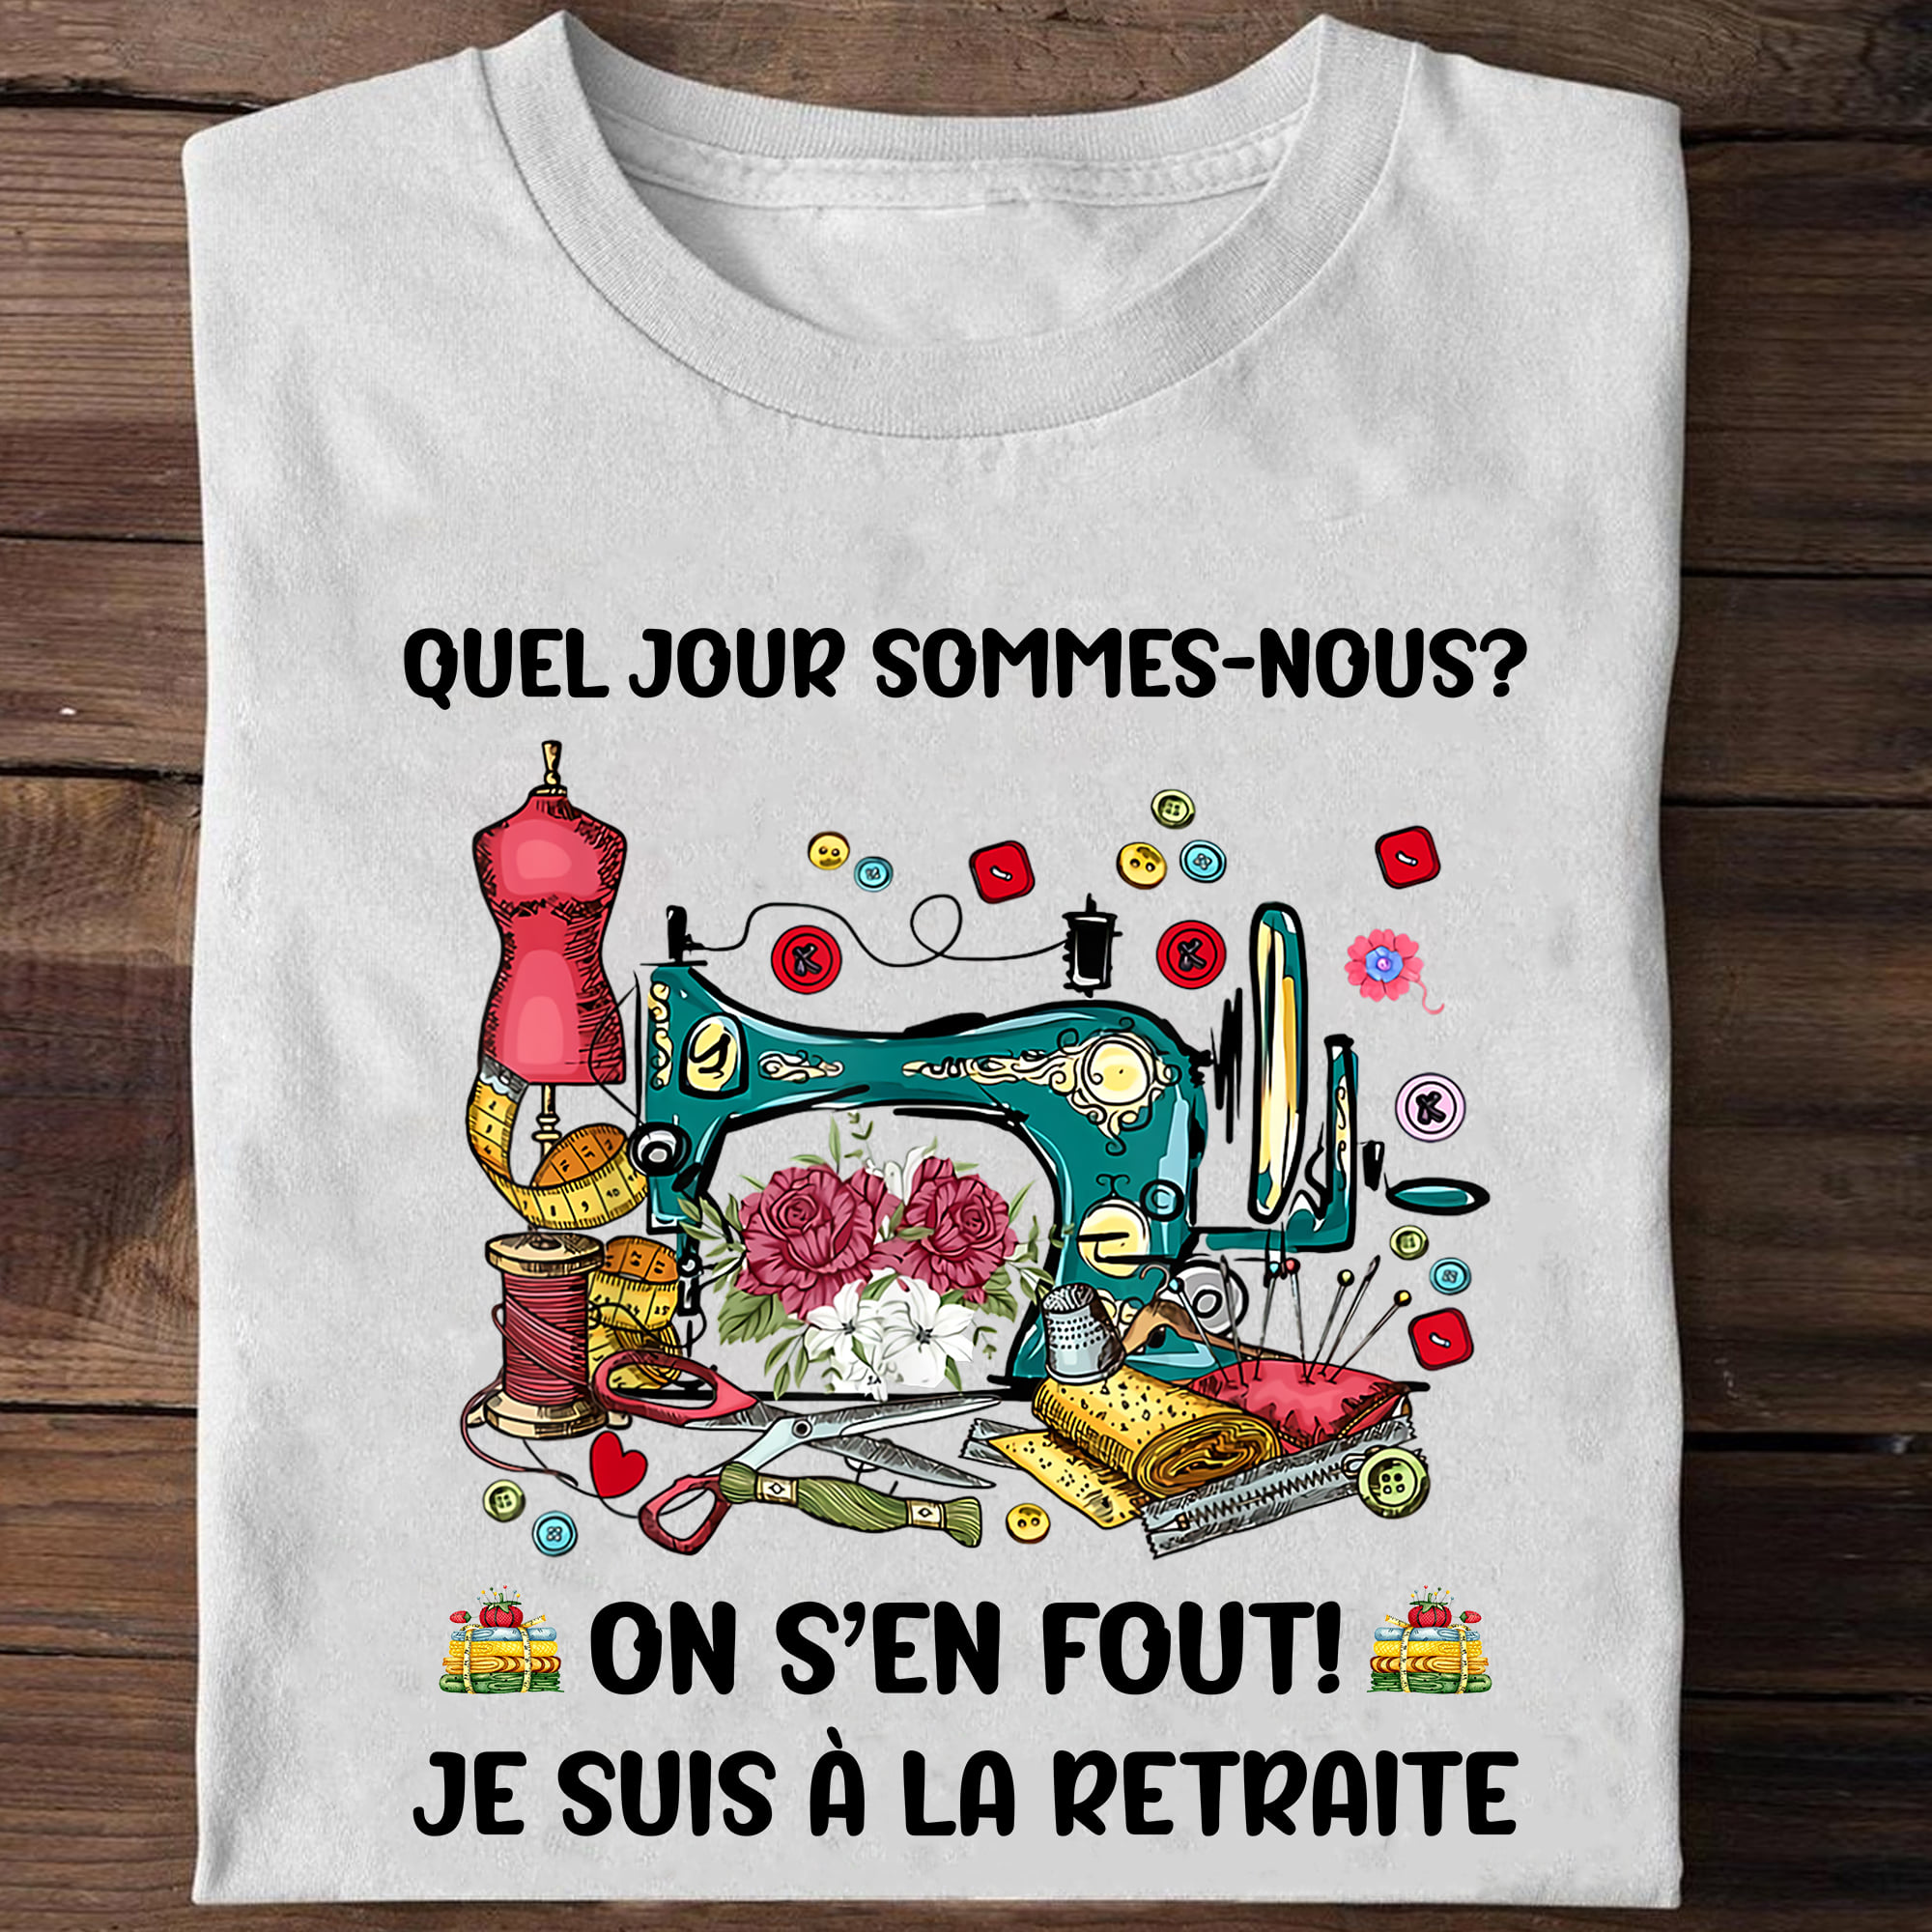 Quel jour sommes nous - Sewing machine graphic T-shirt, gift for sewing lover